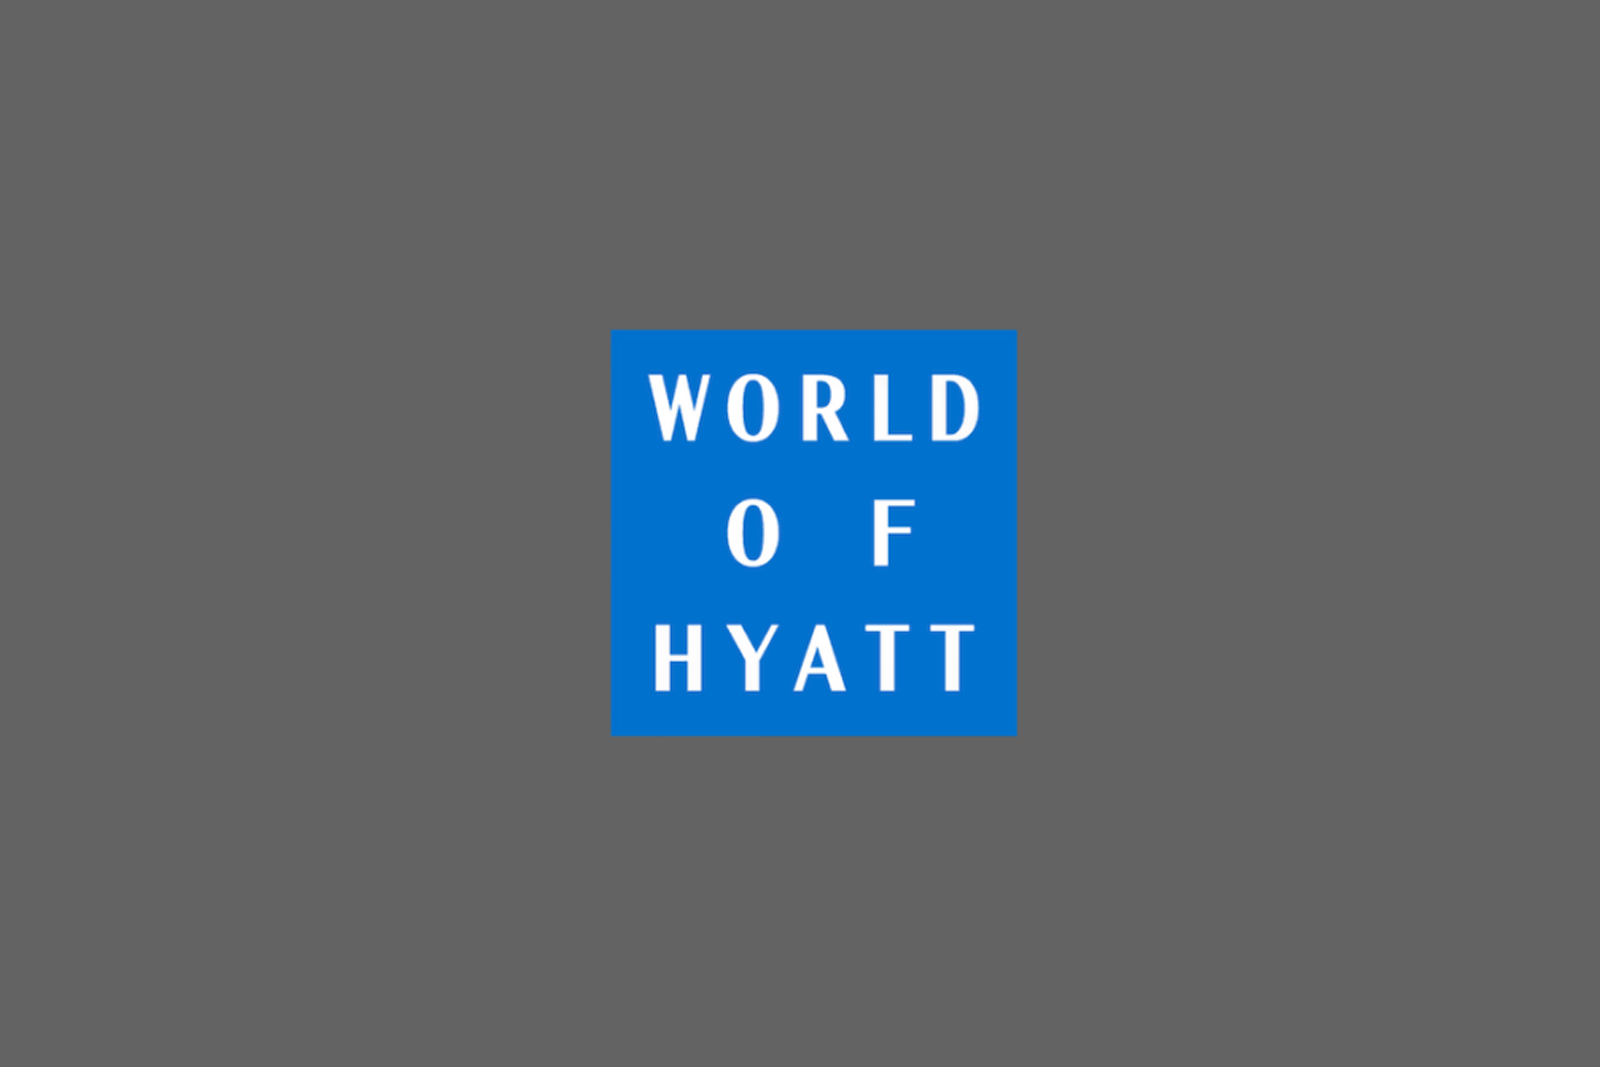 A featured image with the World of Hyatt logo at the center